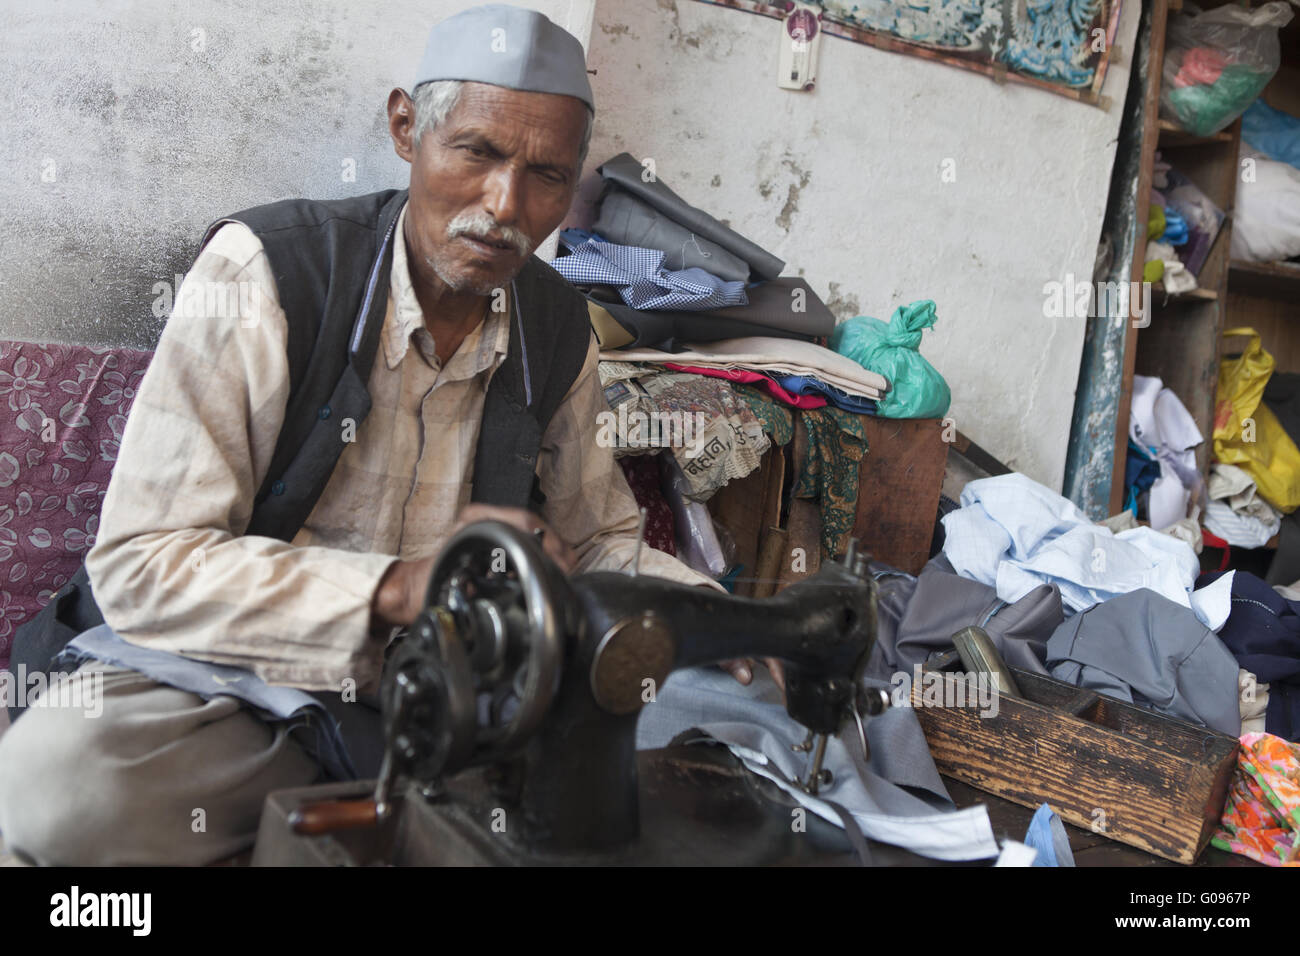 Tailor making clothes on old sewing machine, India Stock Photo